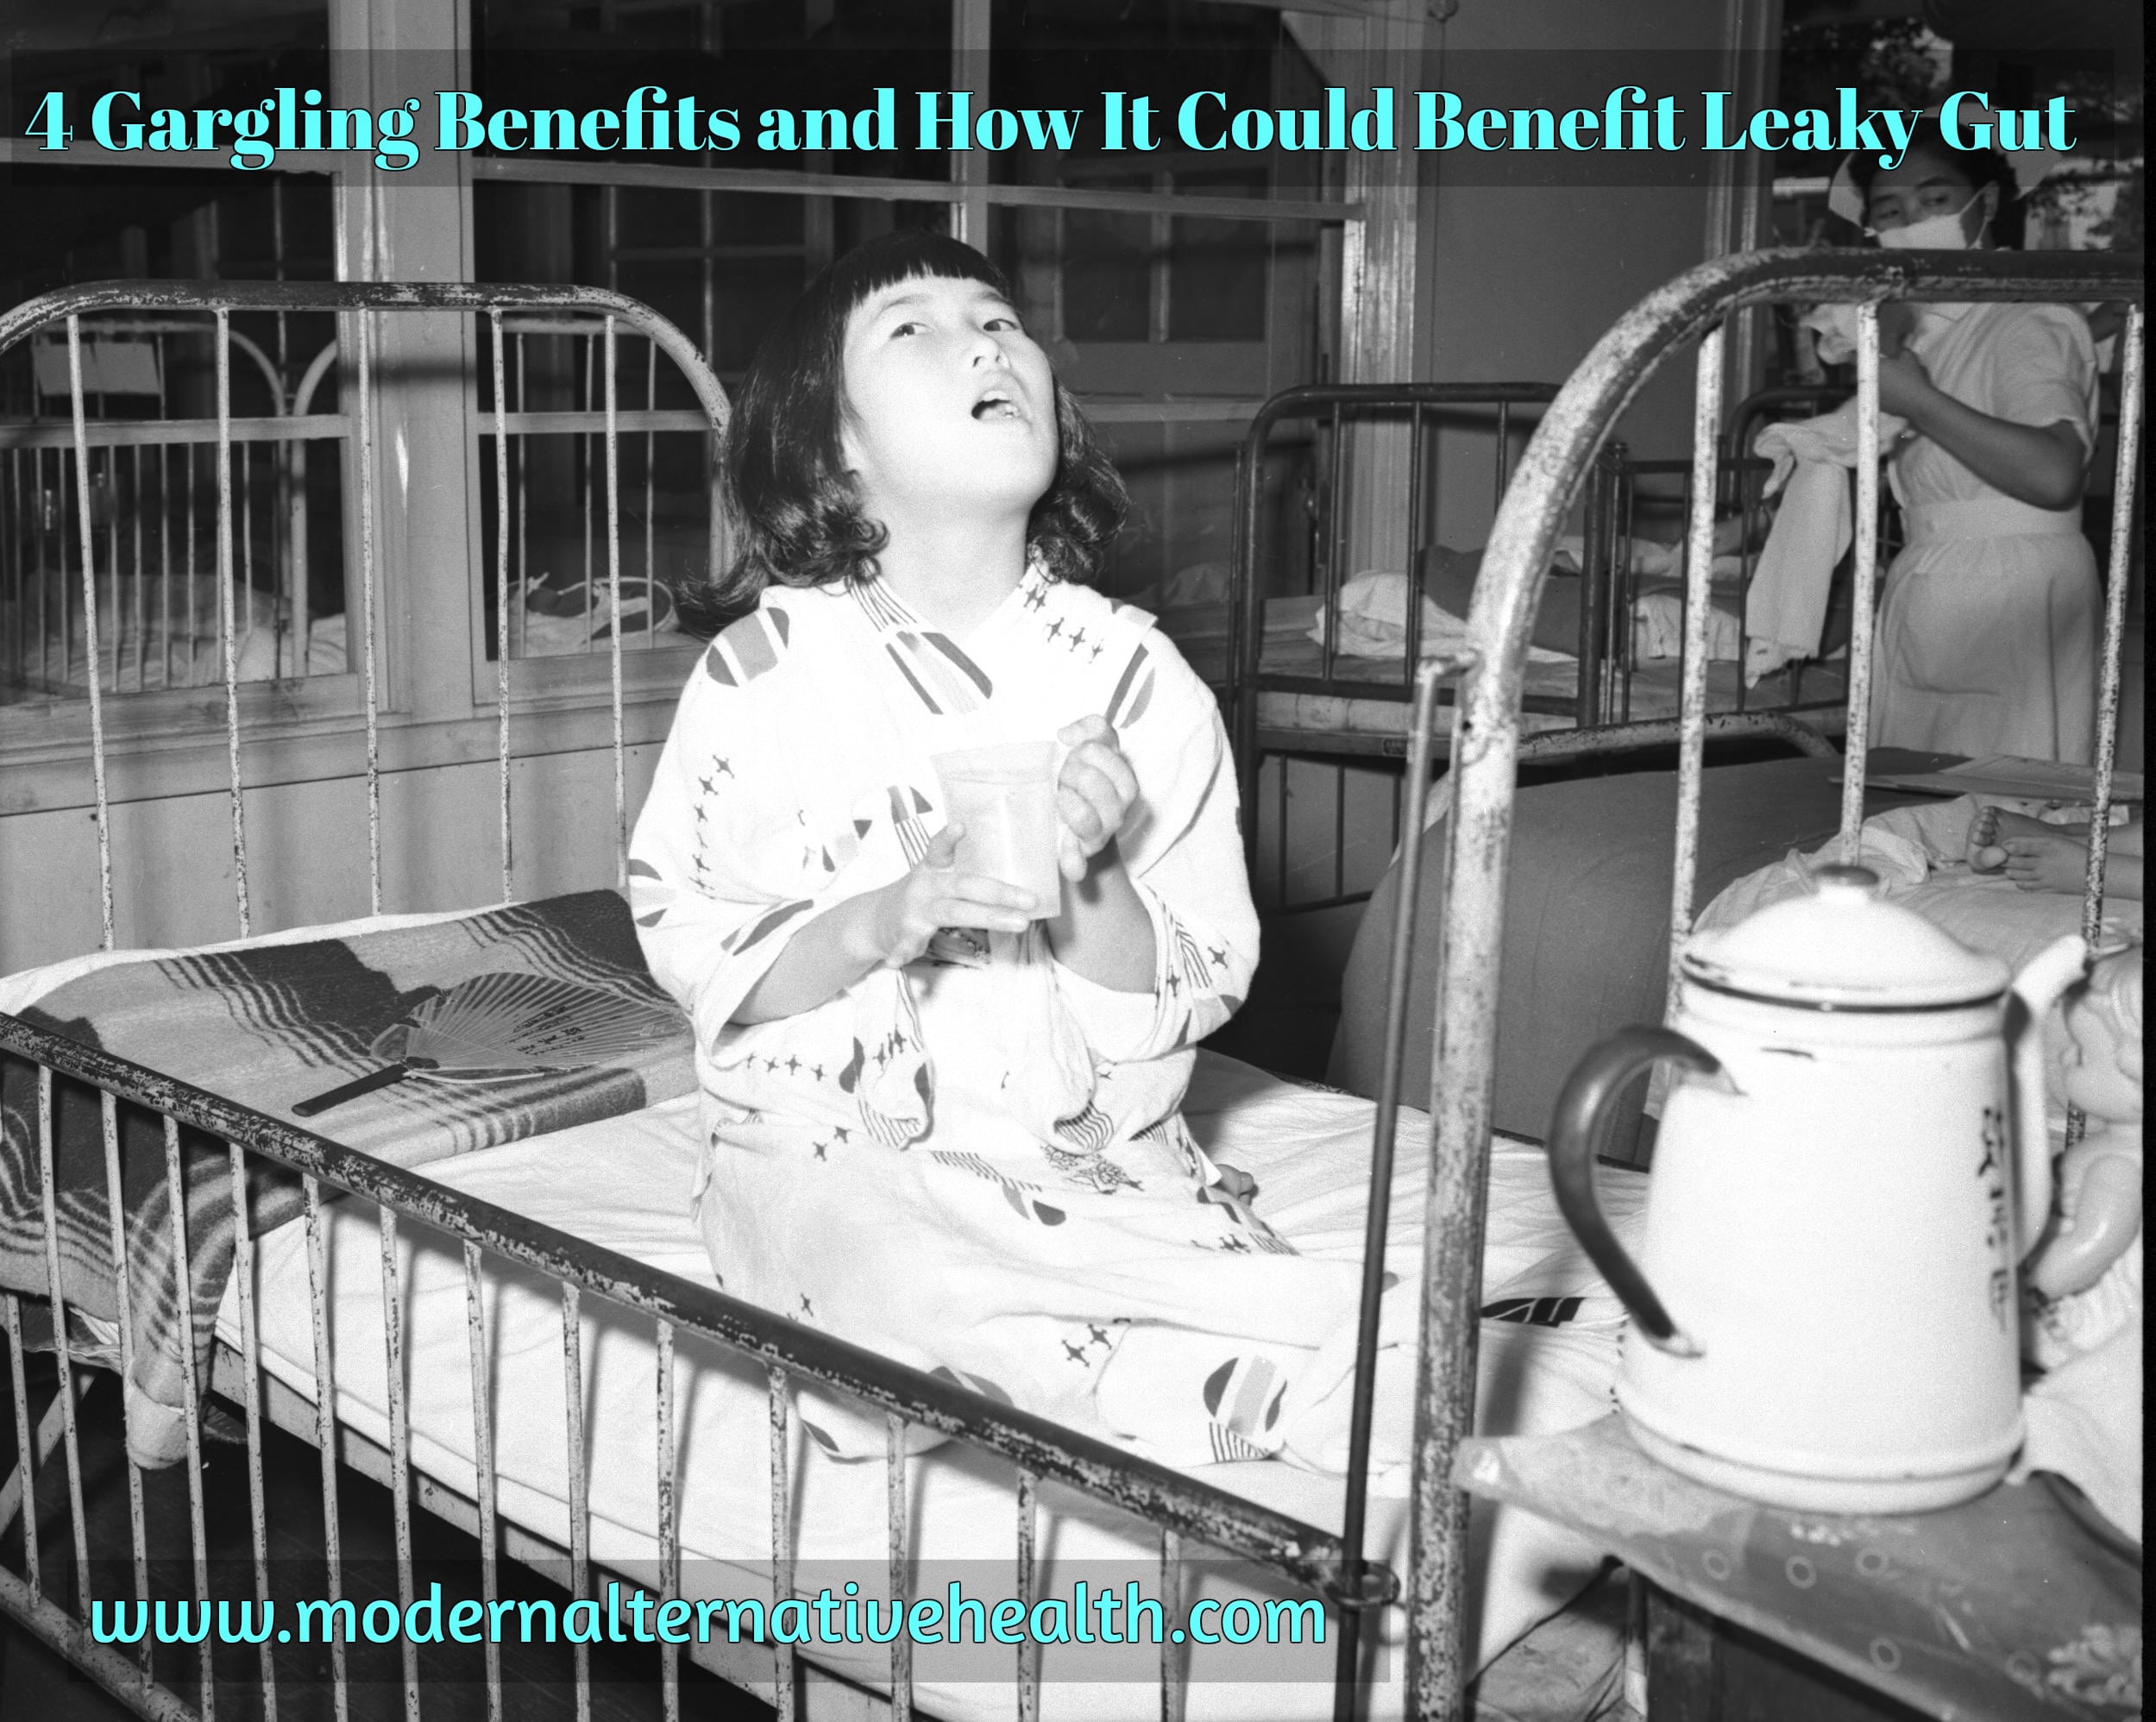 4 Gargling Benefits and How it Could Benefit those with Leaky Gut